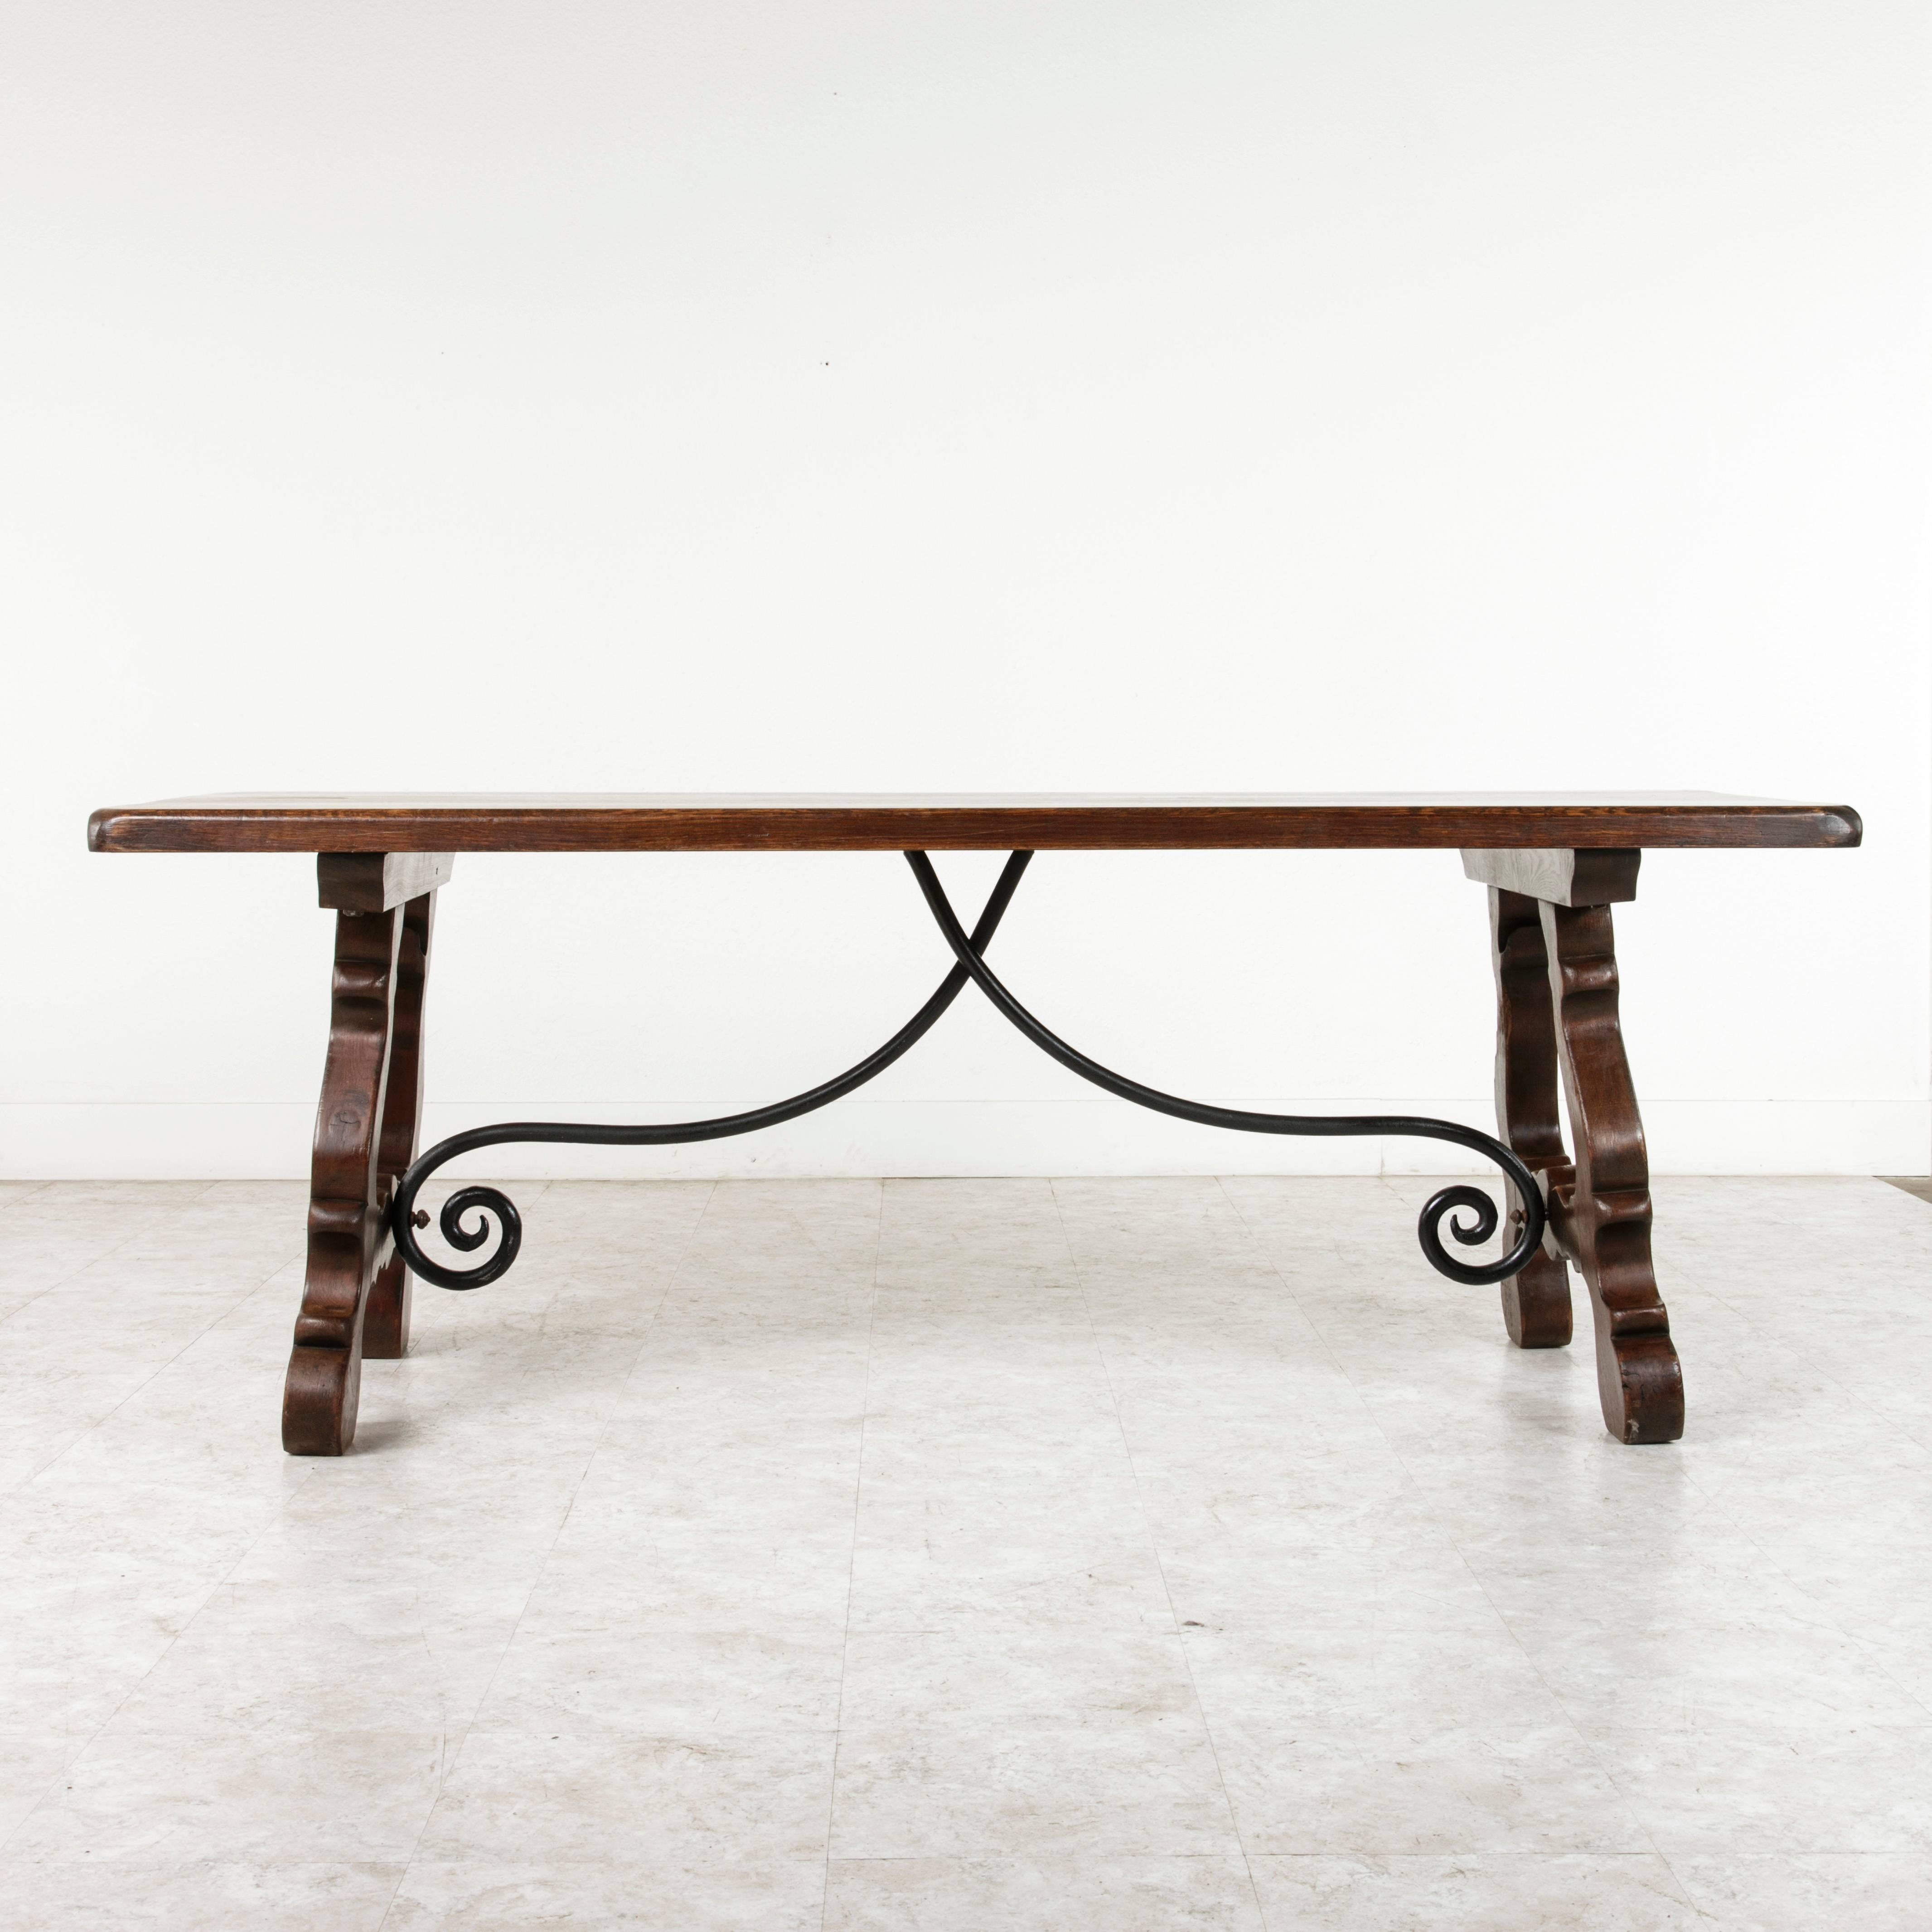 French Spanish Renaissance Style Dining Table, Sofa Table, Console Table, Oak and Iron